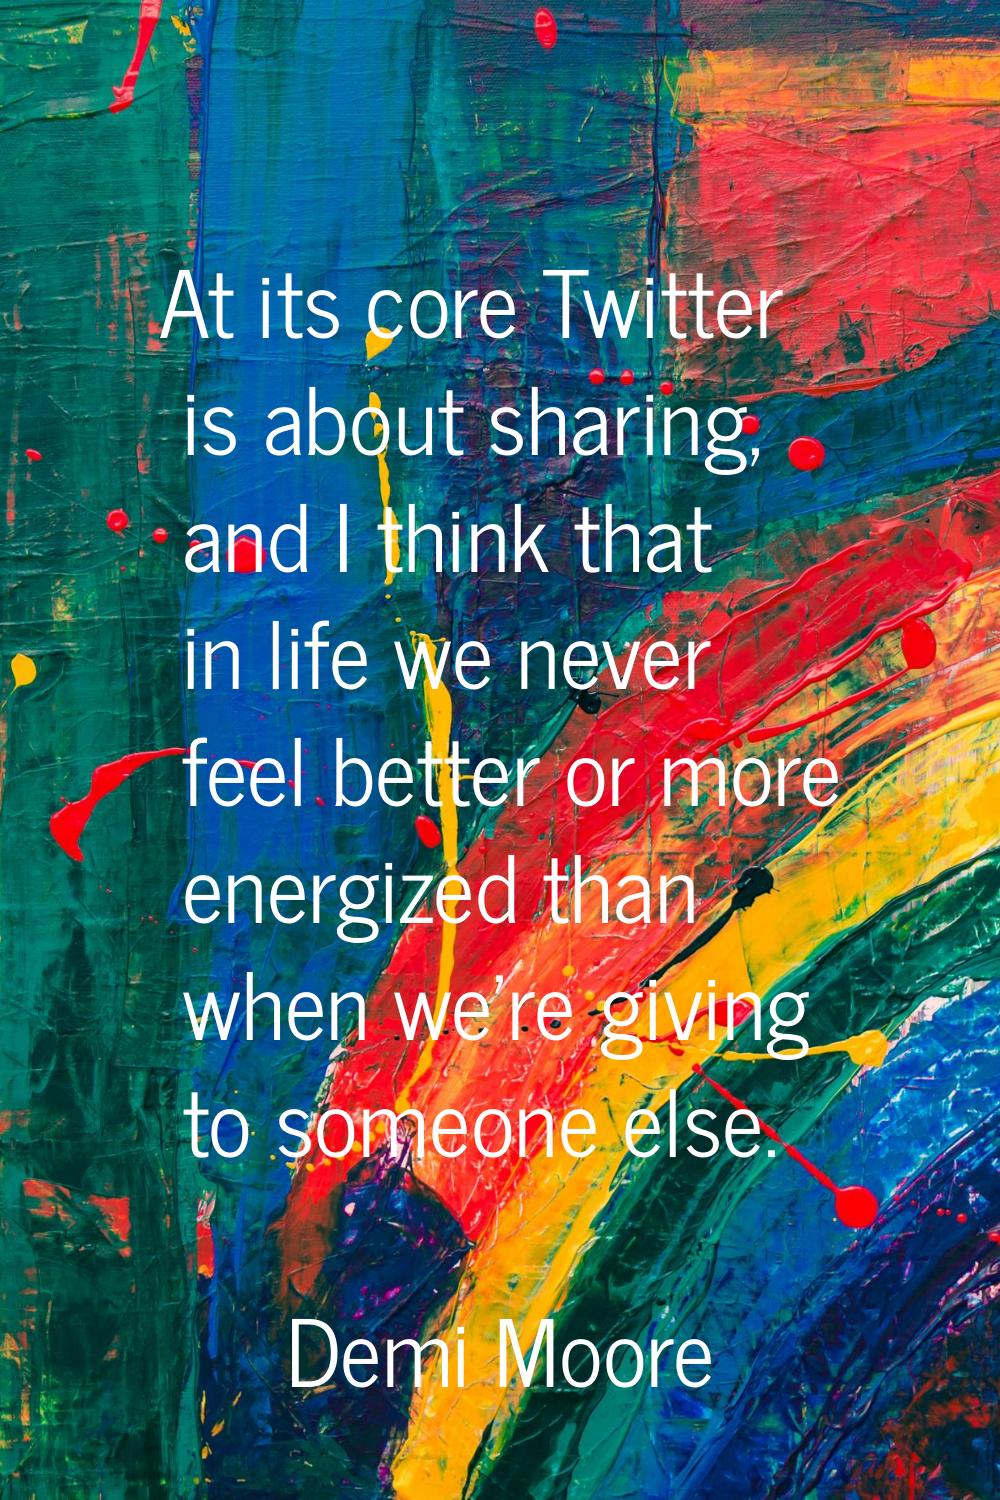 At its core Twitter is about sharing, and I think that in life we never feel better or more energiz